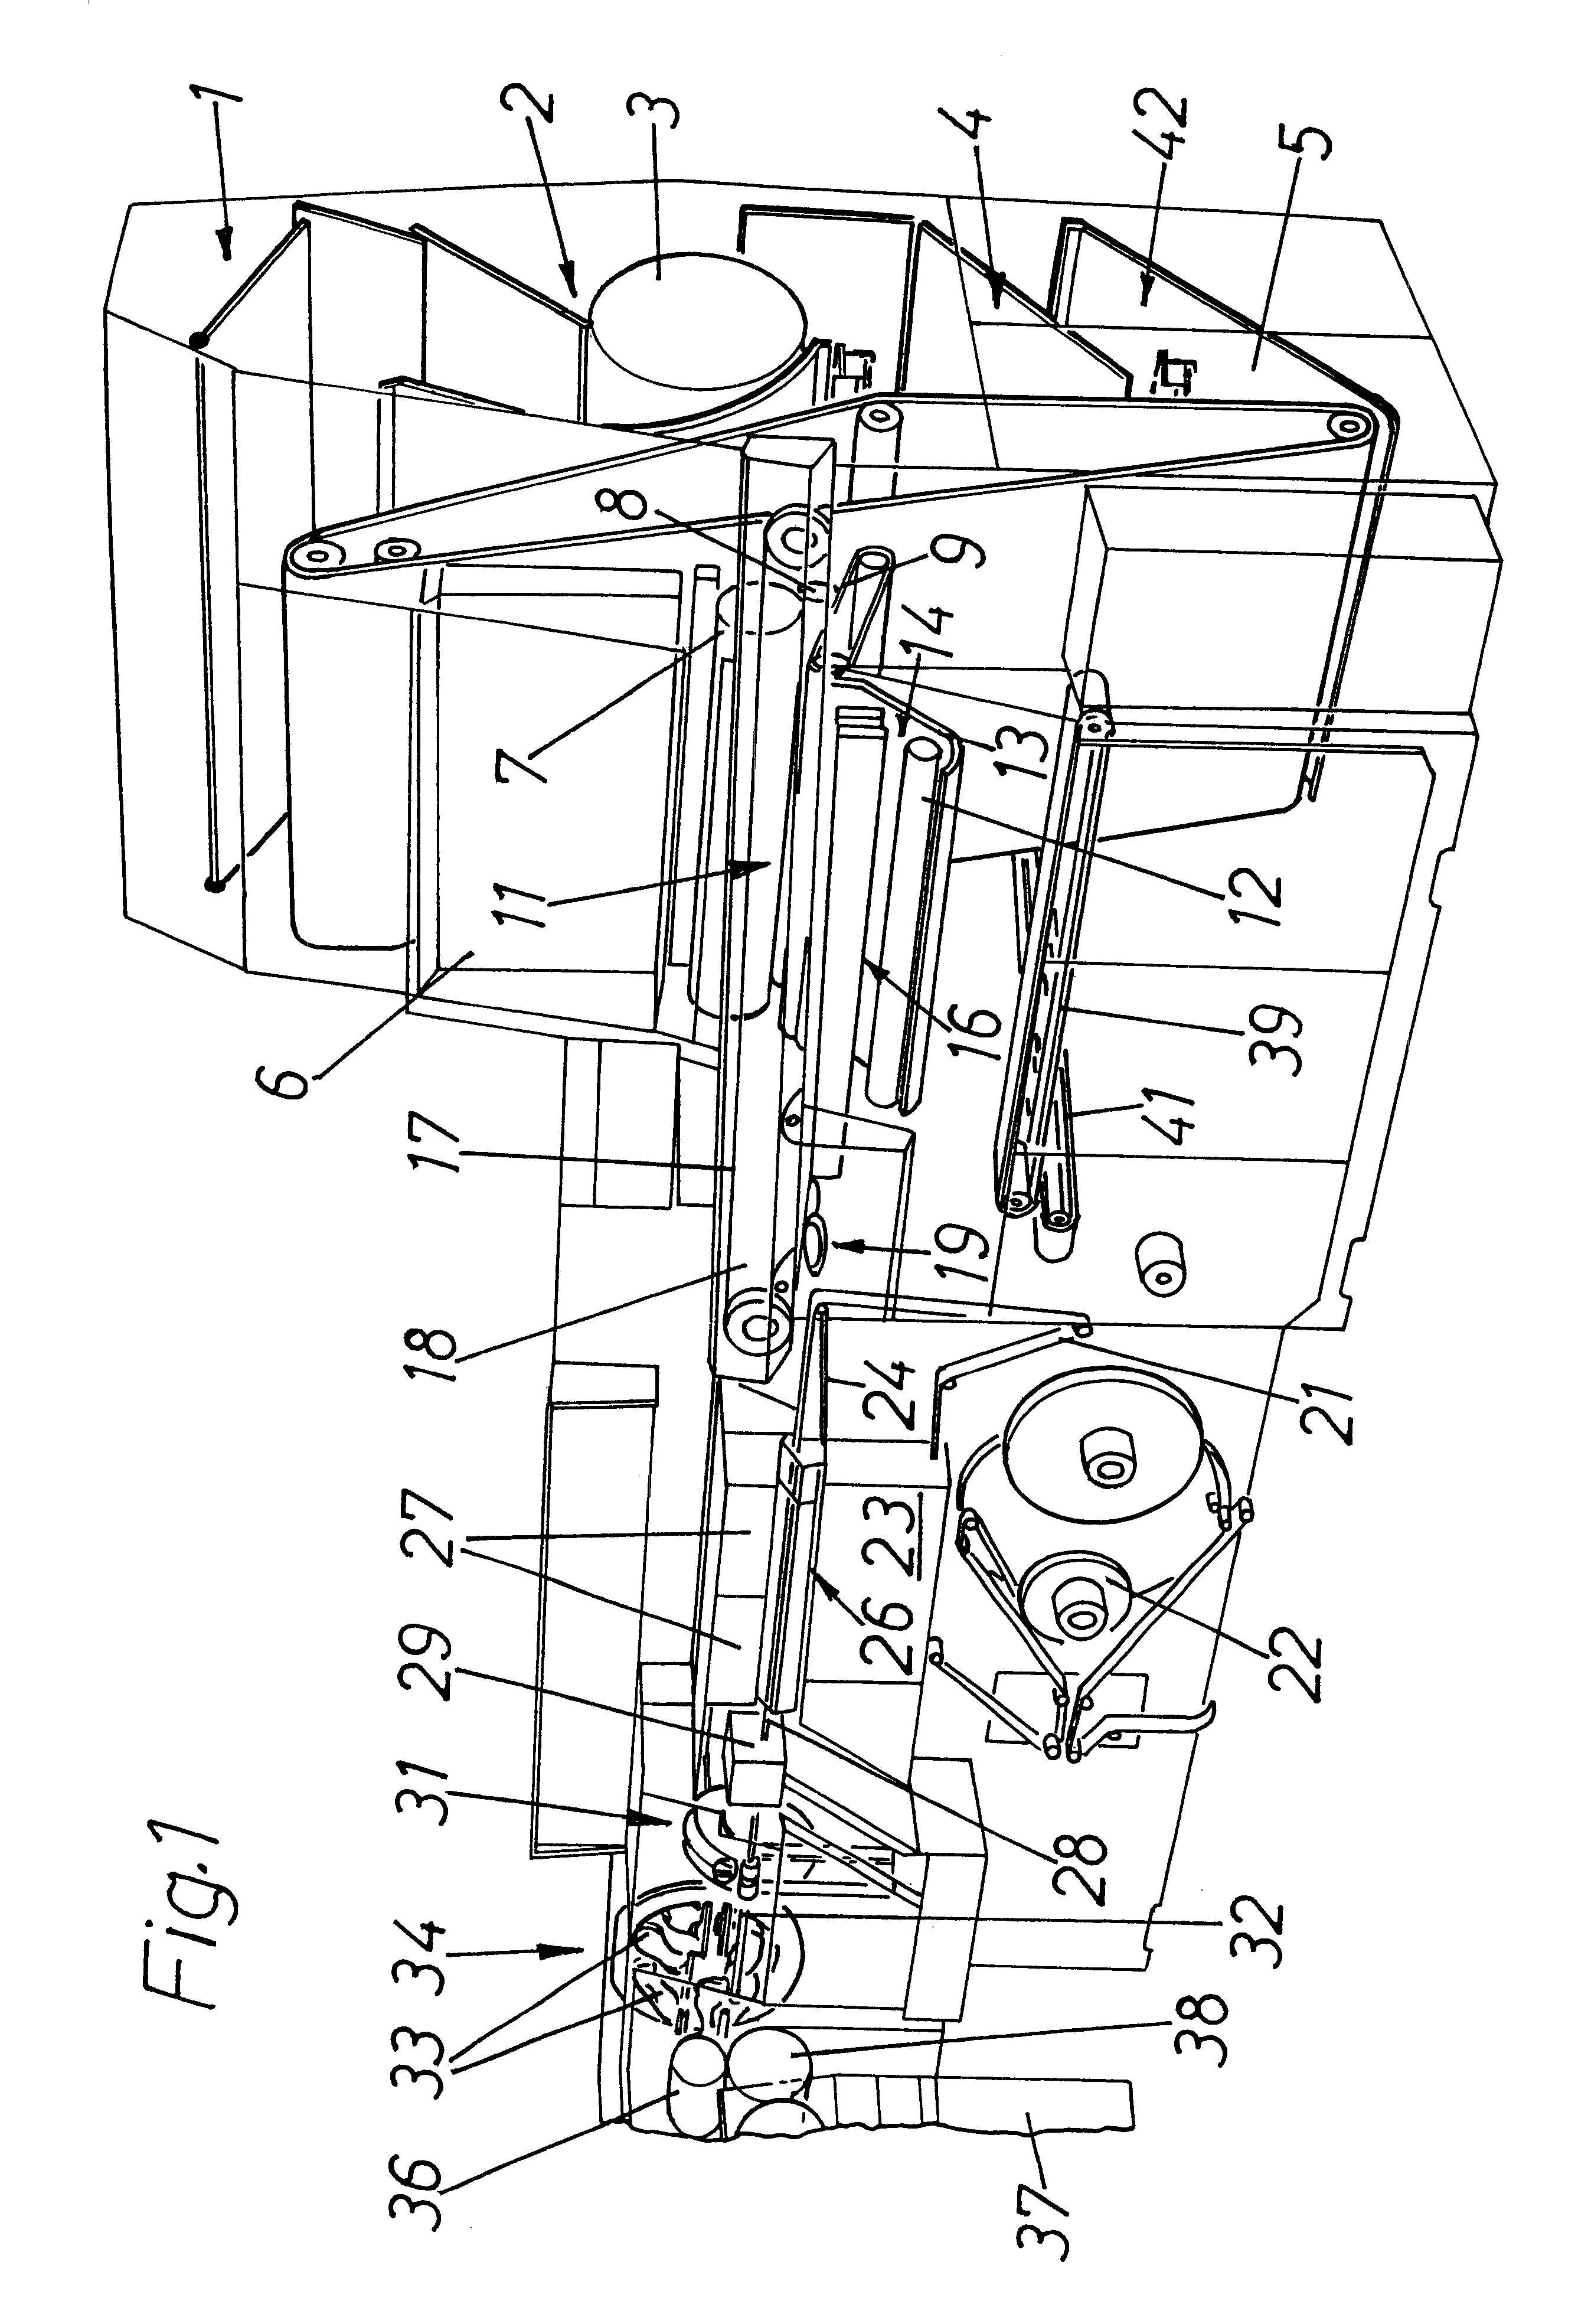 Apparatus for applying printed matter to webs of wrapping material for smokers' products